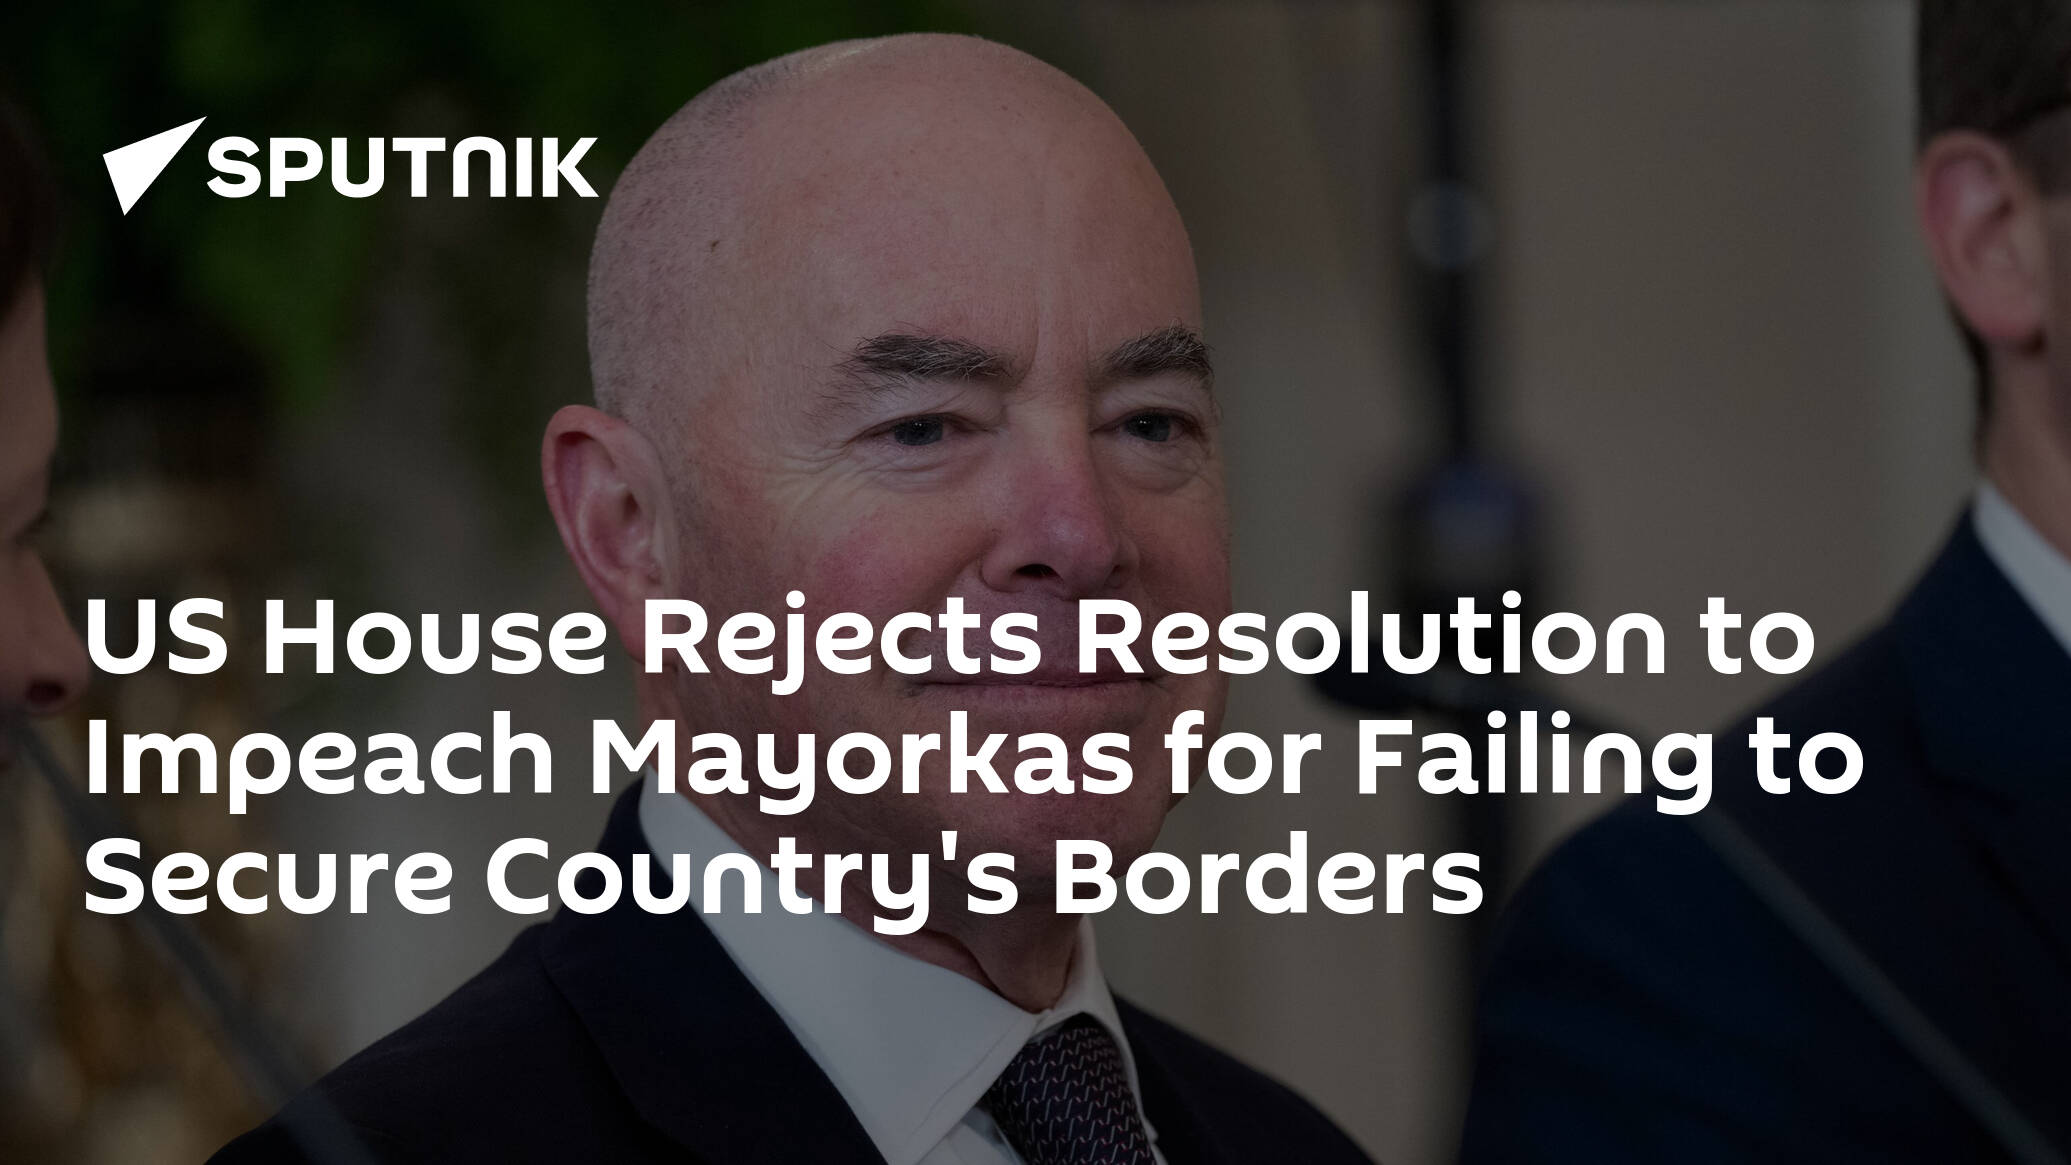 US House Rejects Resolution to Impeach Mayorkas for Failing to Secure Country's Borders